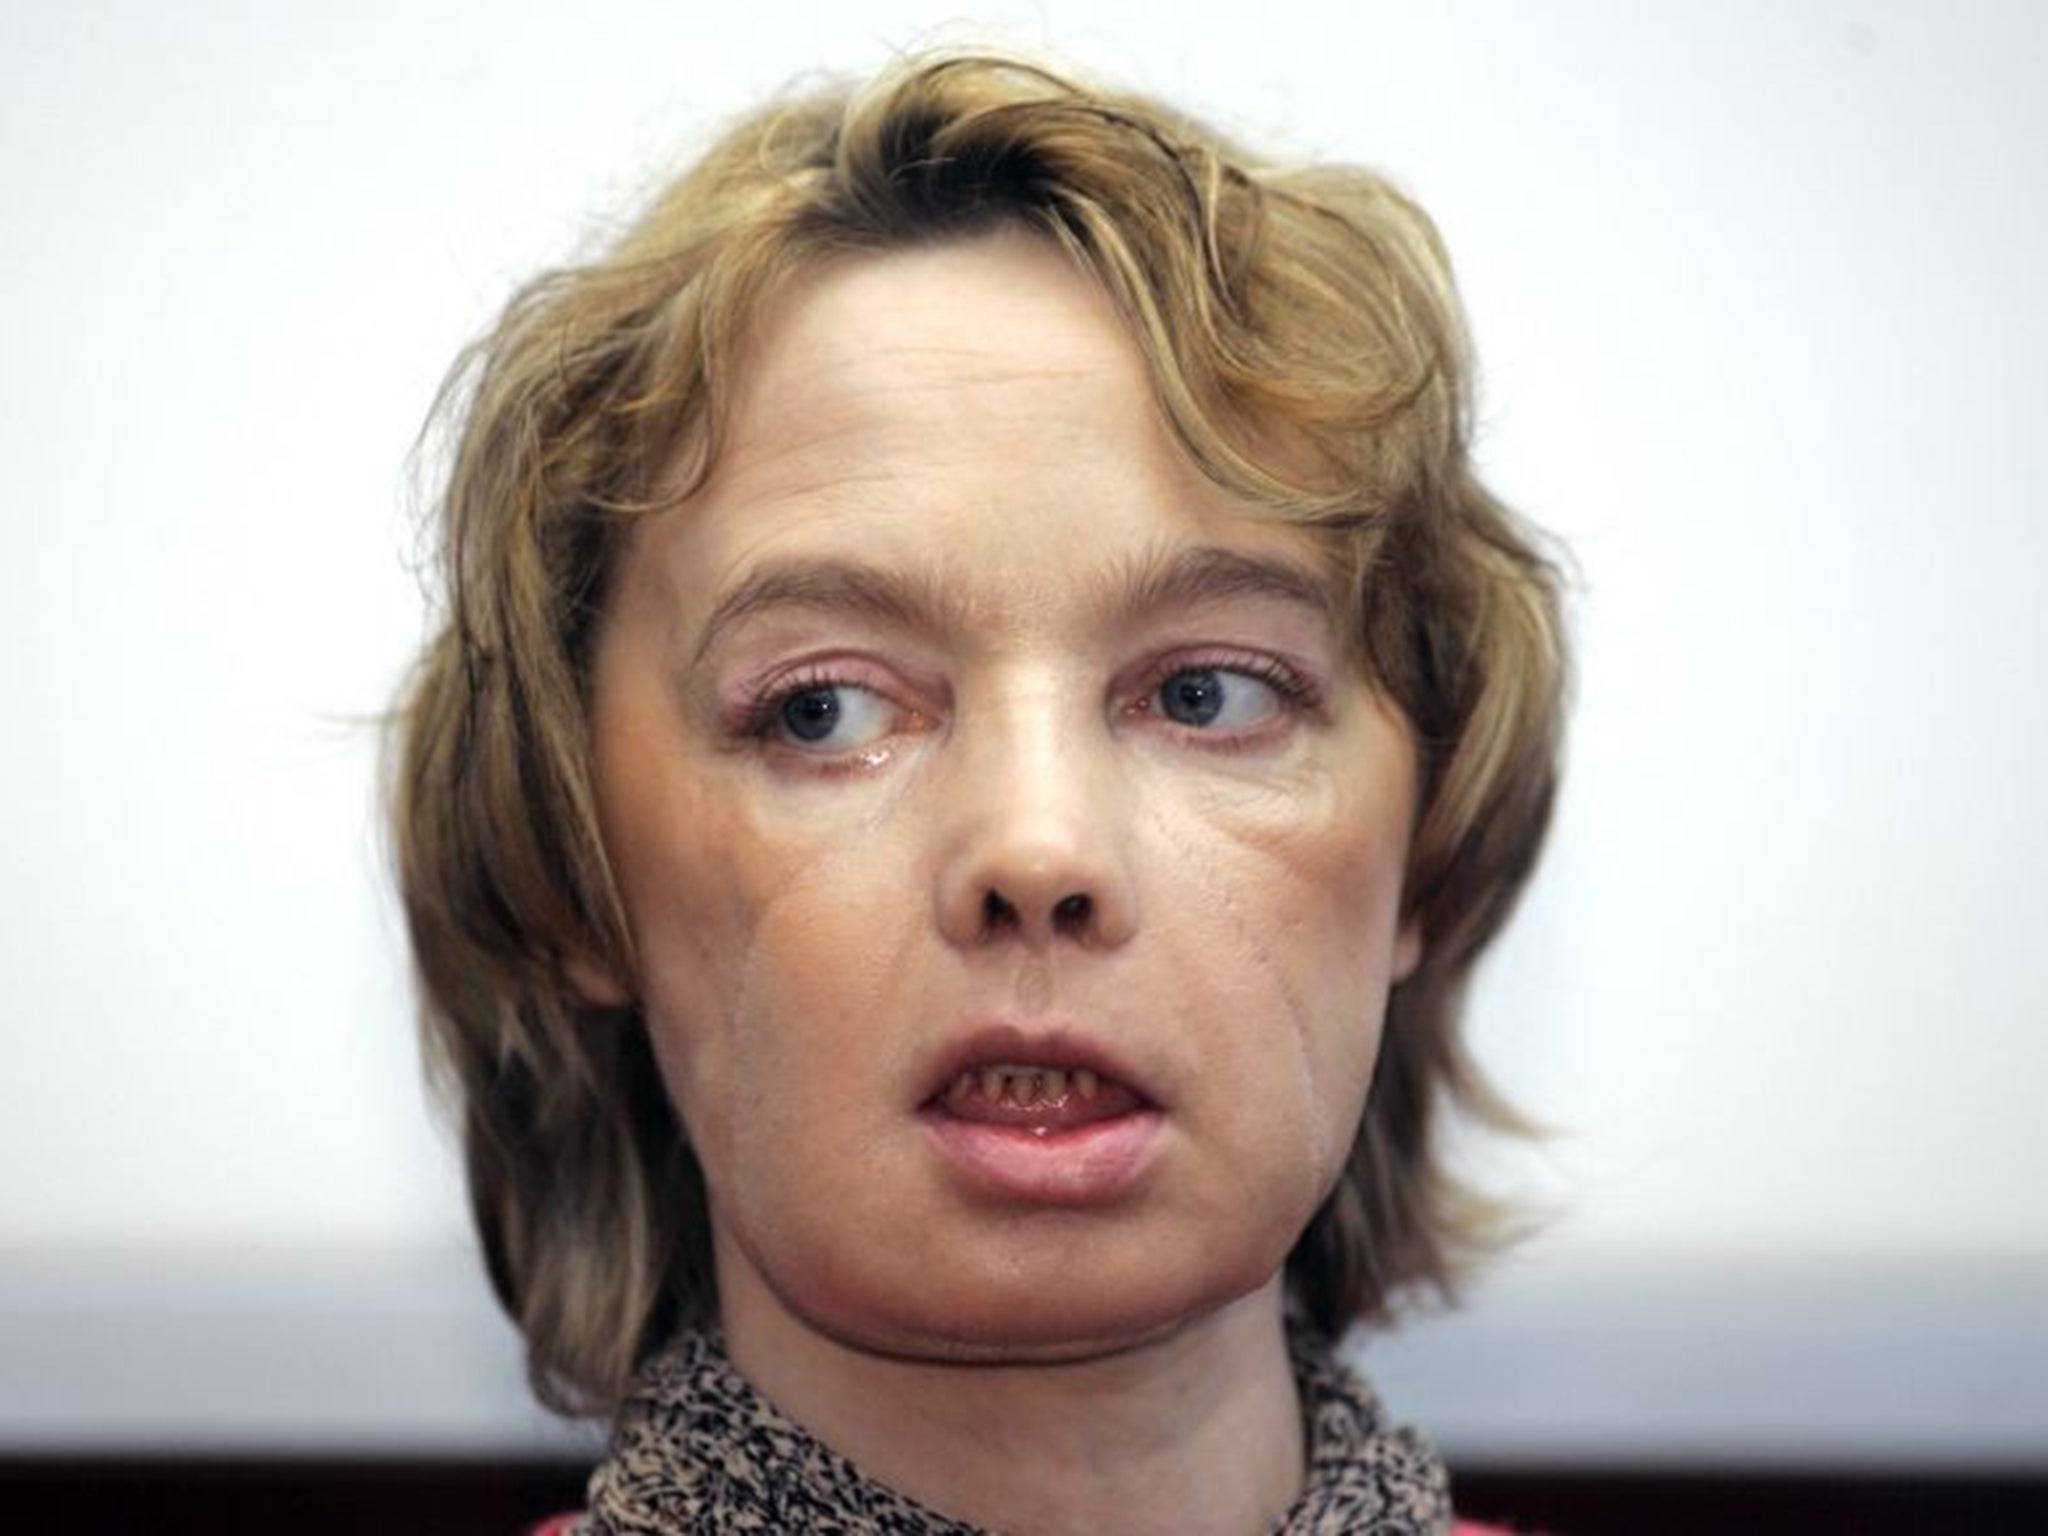 Isabelle Dinoire received her new face in 2005 after being mauled by a dog